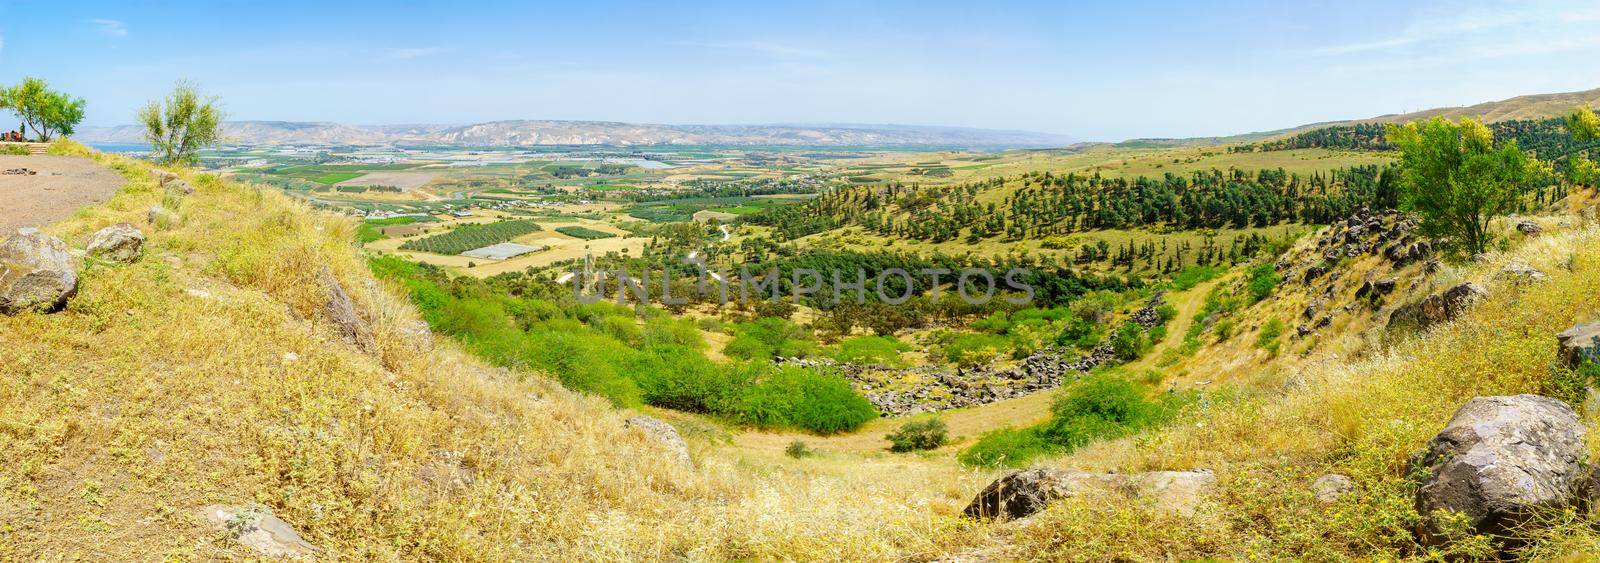 Menahamiya, Israel - April 21, 2021: Panoramic view of the Sea of Galilee and the Lower Jordan River valley, with visitors. Northern Israel